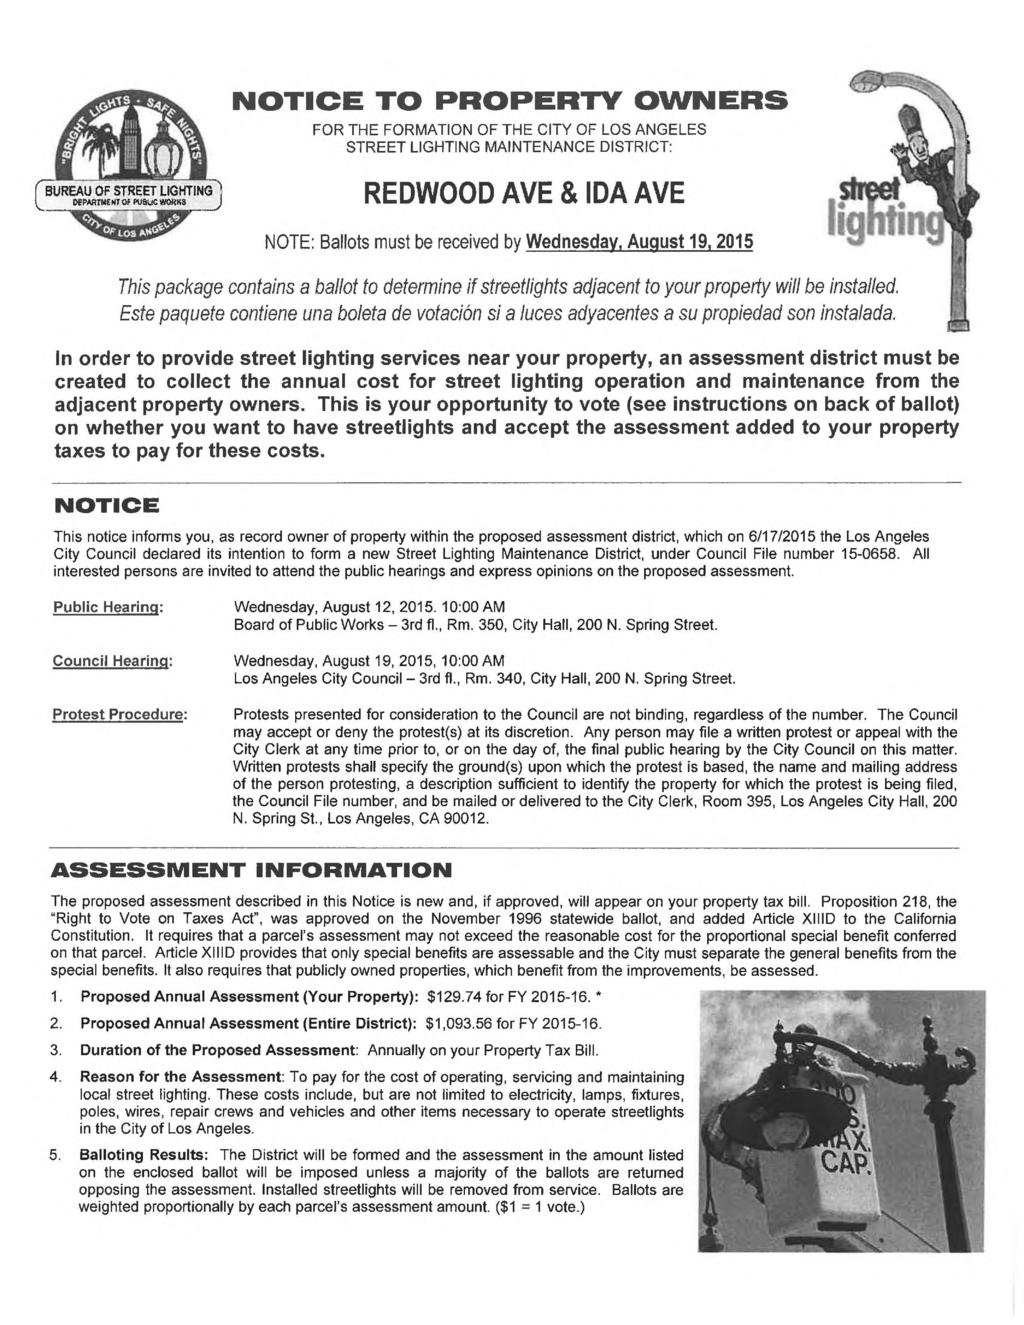 m BUREAU OF STREET LIGHTING WPAaiMENT Of POSuC WORKS J NOTICE TO PROPERTY OWNERS FOR THE FORMATION OF THE CITY OF LOS ANGELES STREET LIGHTING MAINTENANCE DISTRICT: REDWOOD AVE & IDA AVE NOTE: Ballots